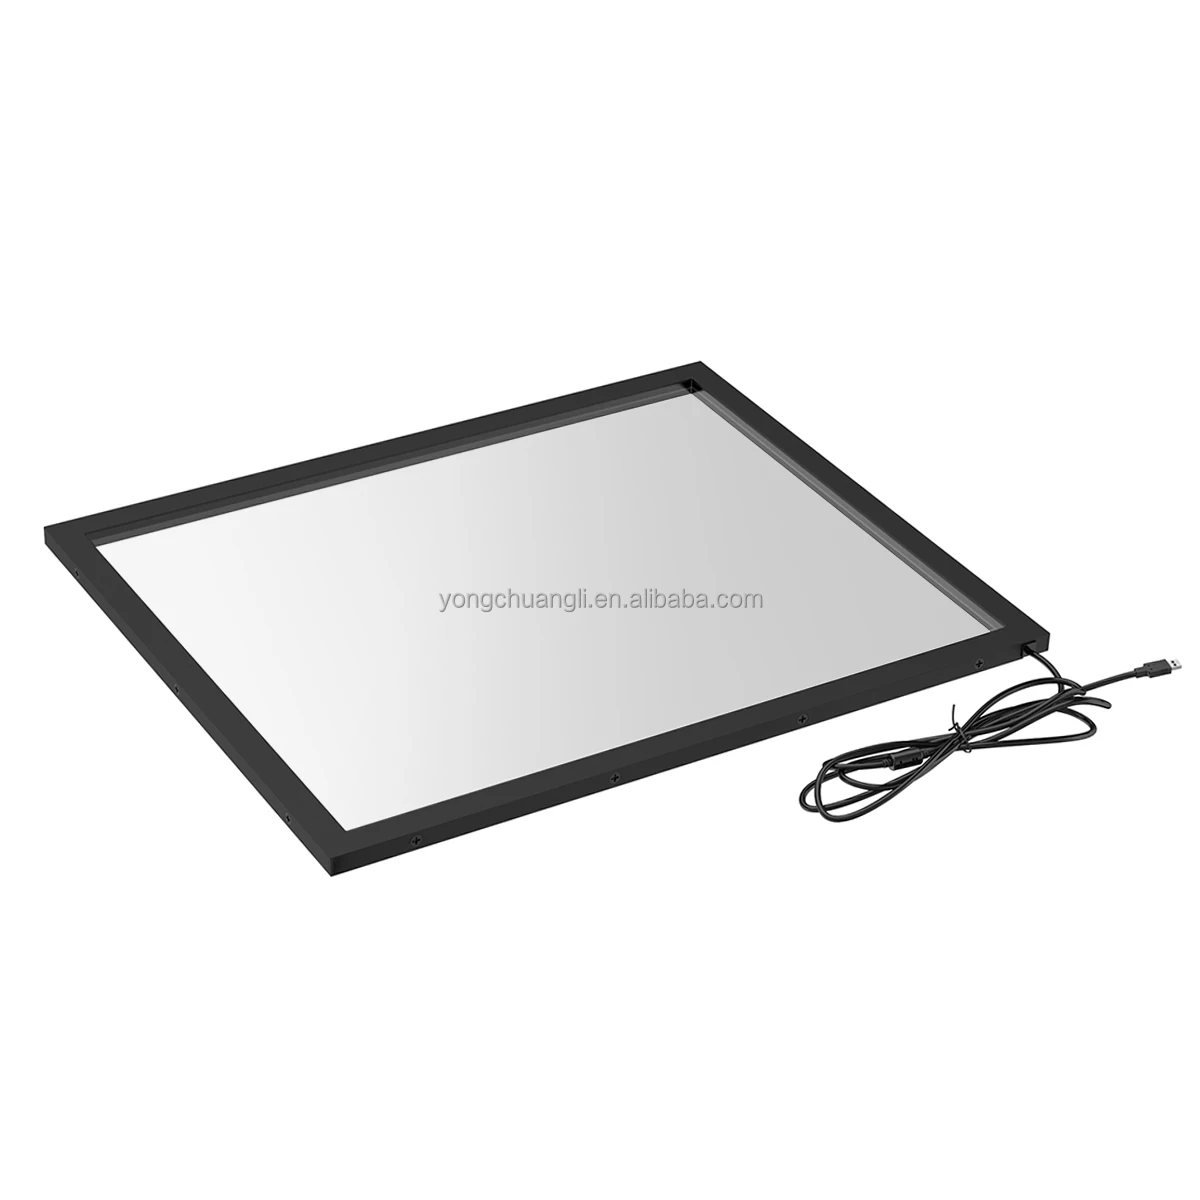 21.5 inch 10 touch  points IR touch screen frame Multi Touch Screen plane with USB glass manufacturer